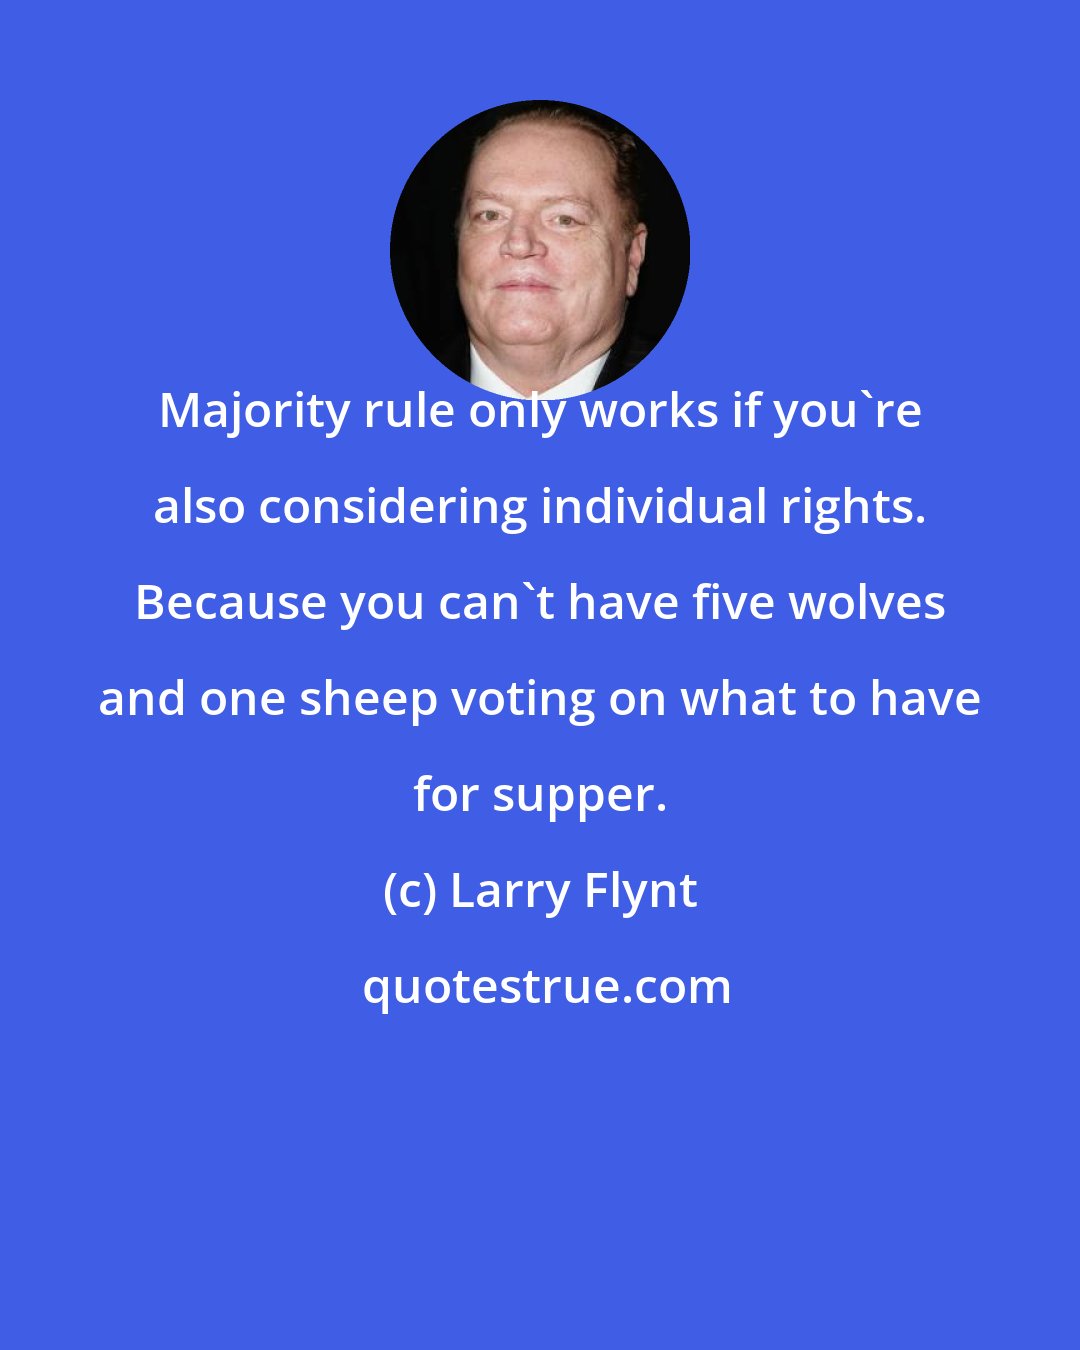 Larry Flynt: Majority rule only works if you're also considering individual rights. Because you can't have five wolves and one sheep voting on what to have for supper.